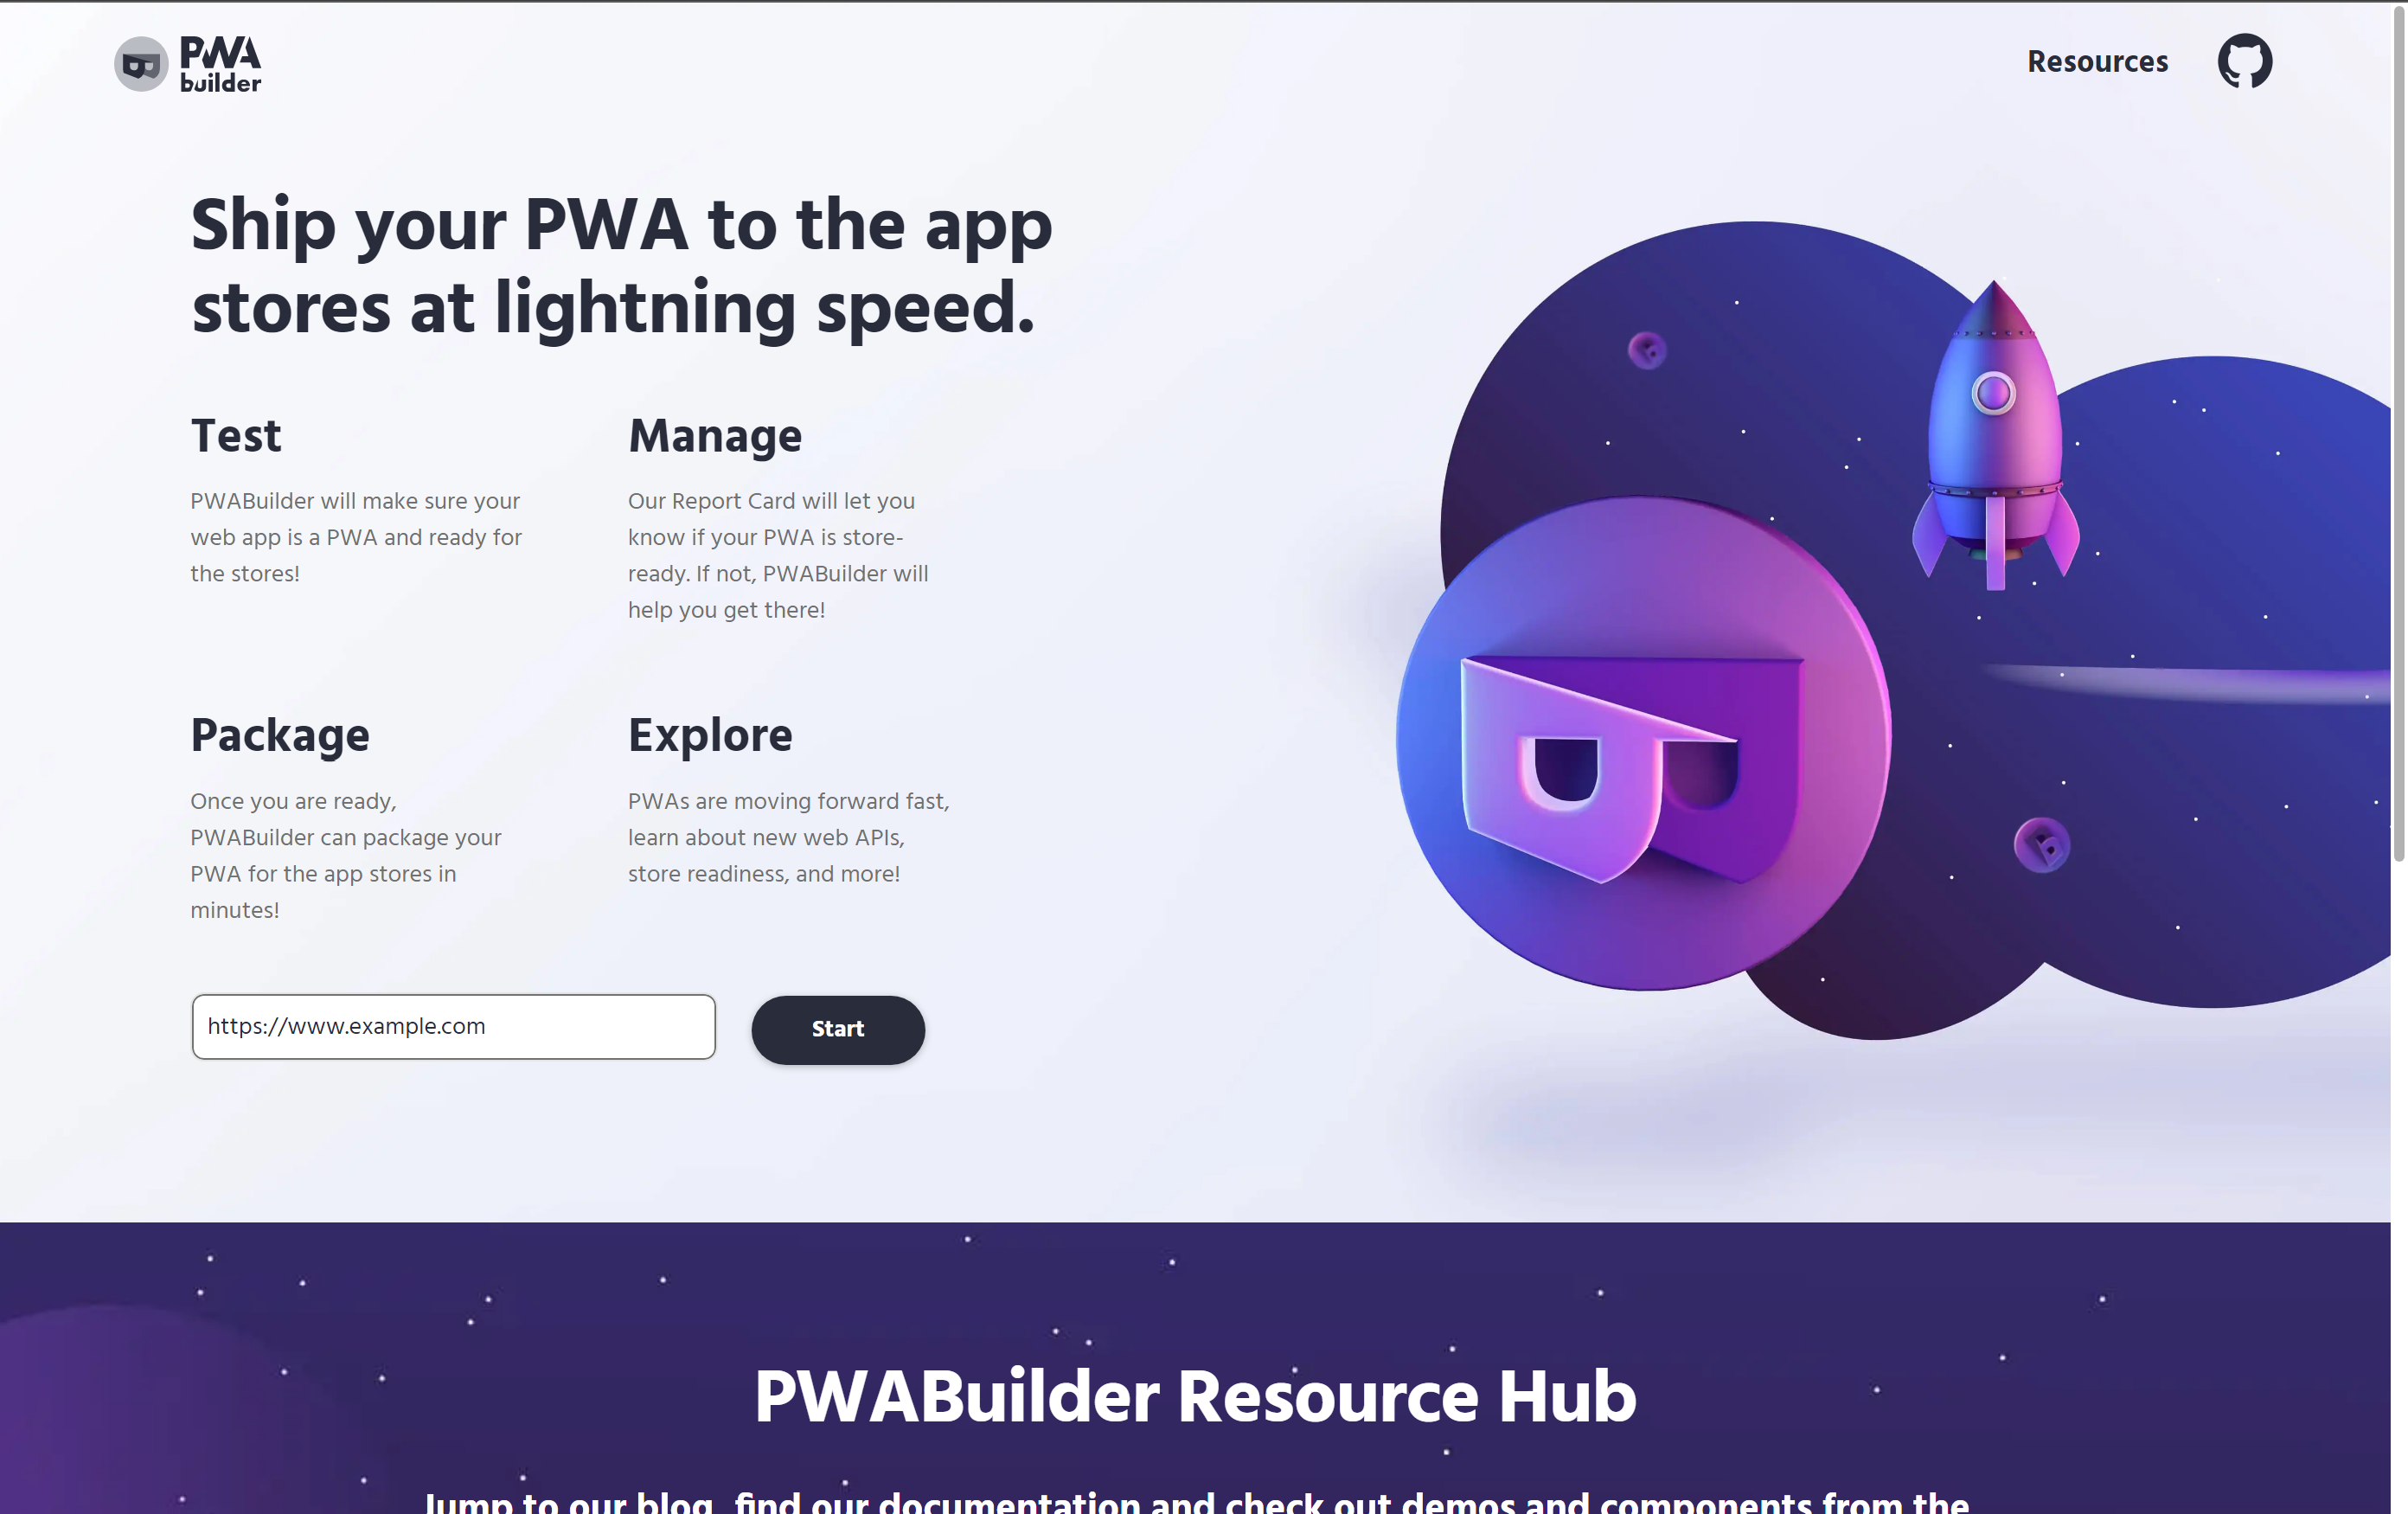 A screenshot that shows the homepage of PWABuilder